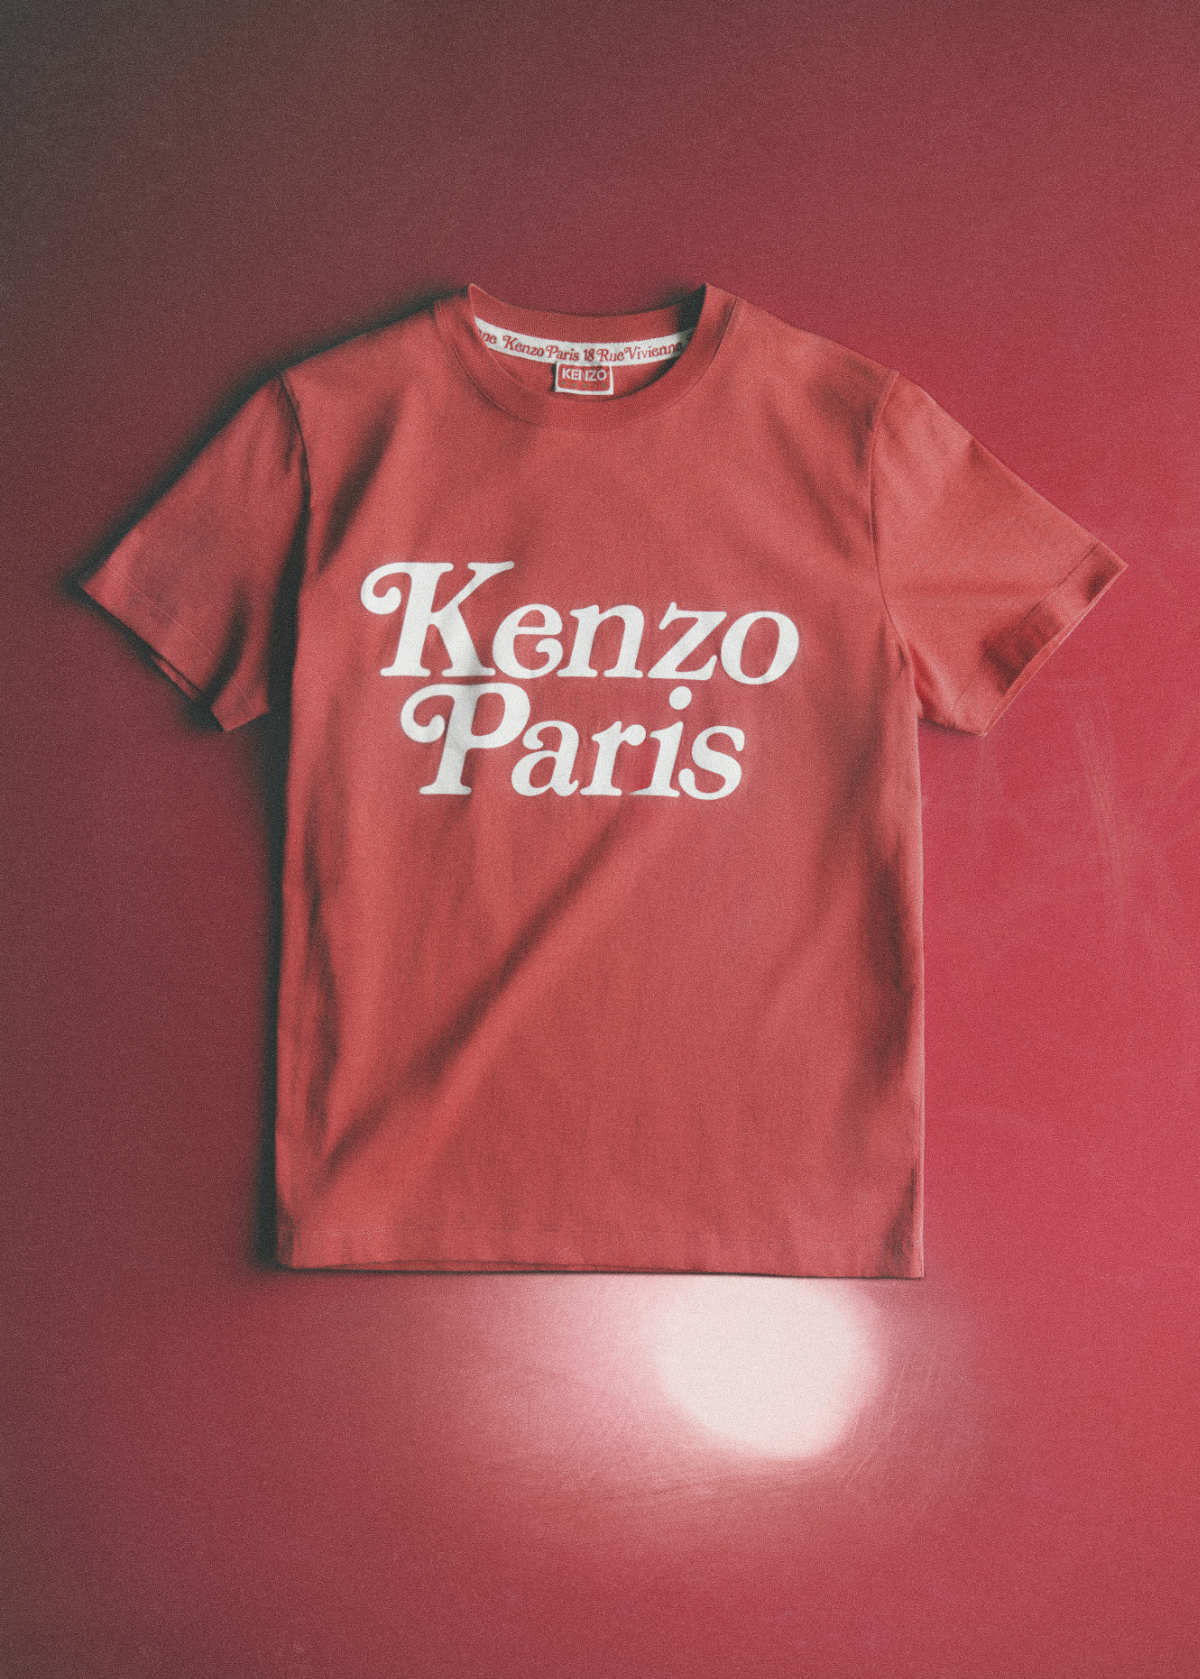 The Kenzo X Verdy ‘Colors’ Collection